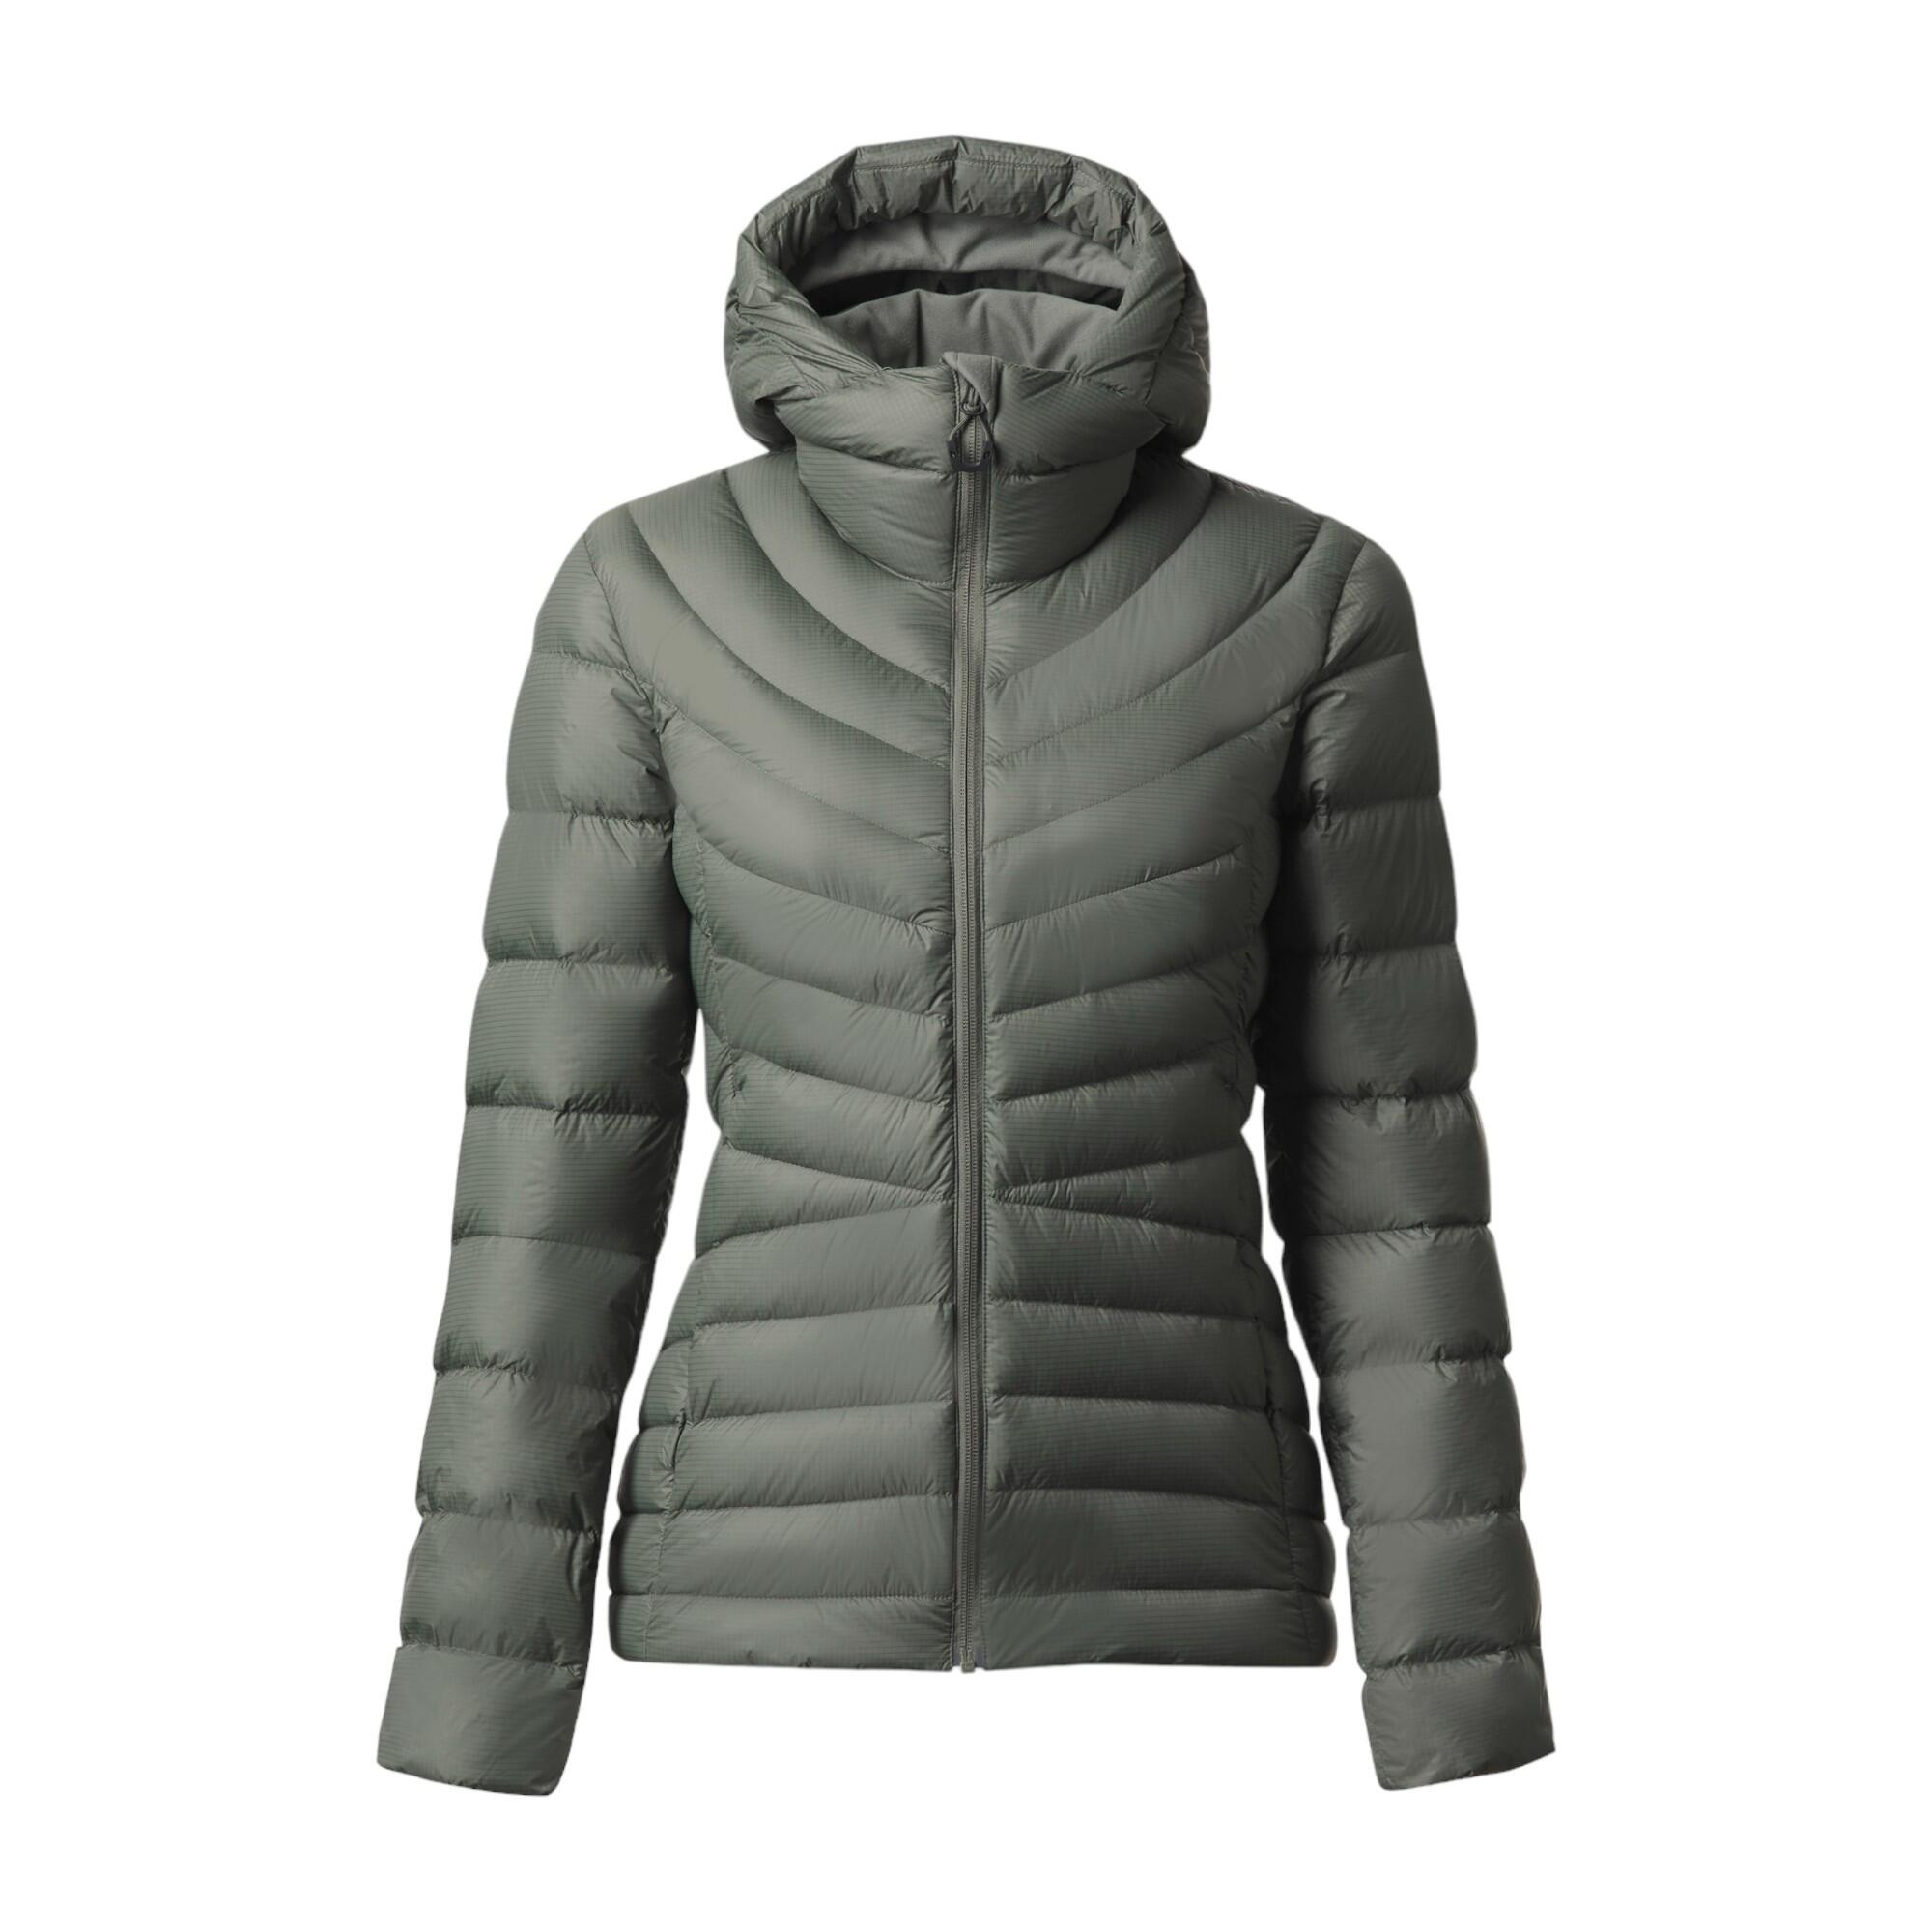 Women's Down and Padded Hiking Jackets